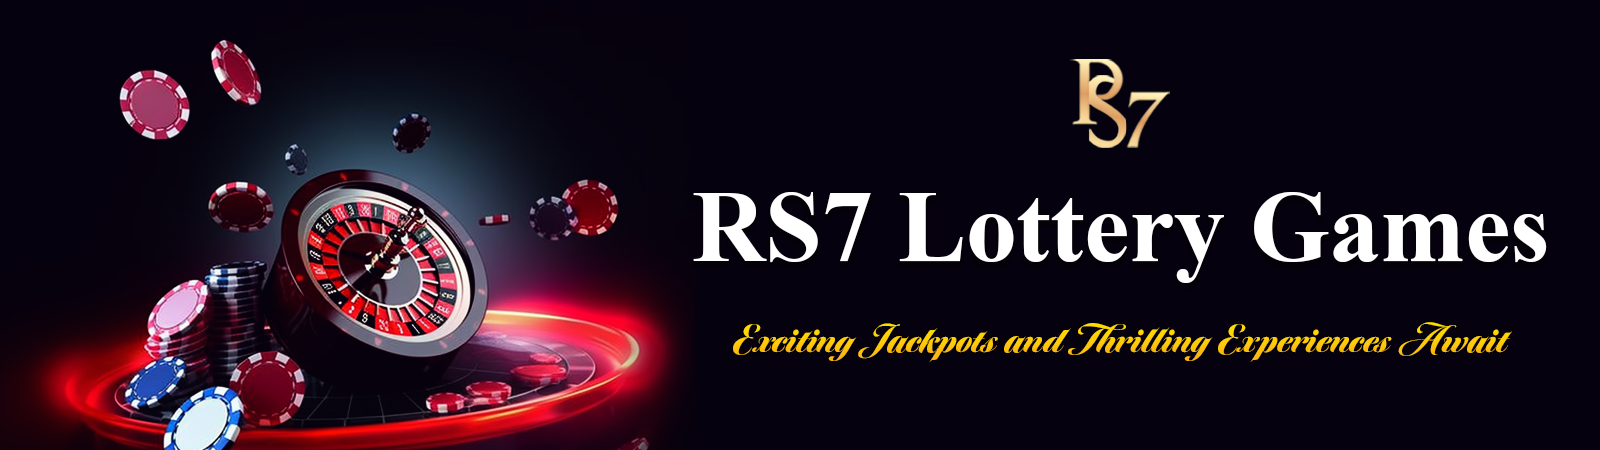 RS7 Lottery Games | Exciting Jackpots and Thrilling Experiences Await